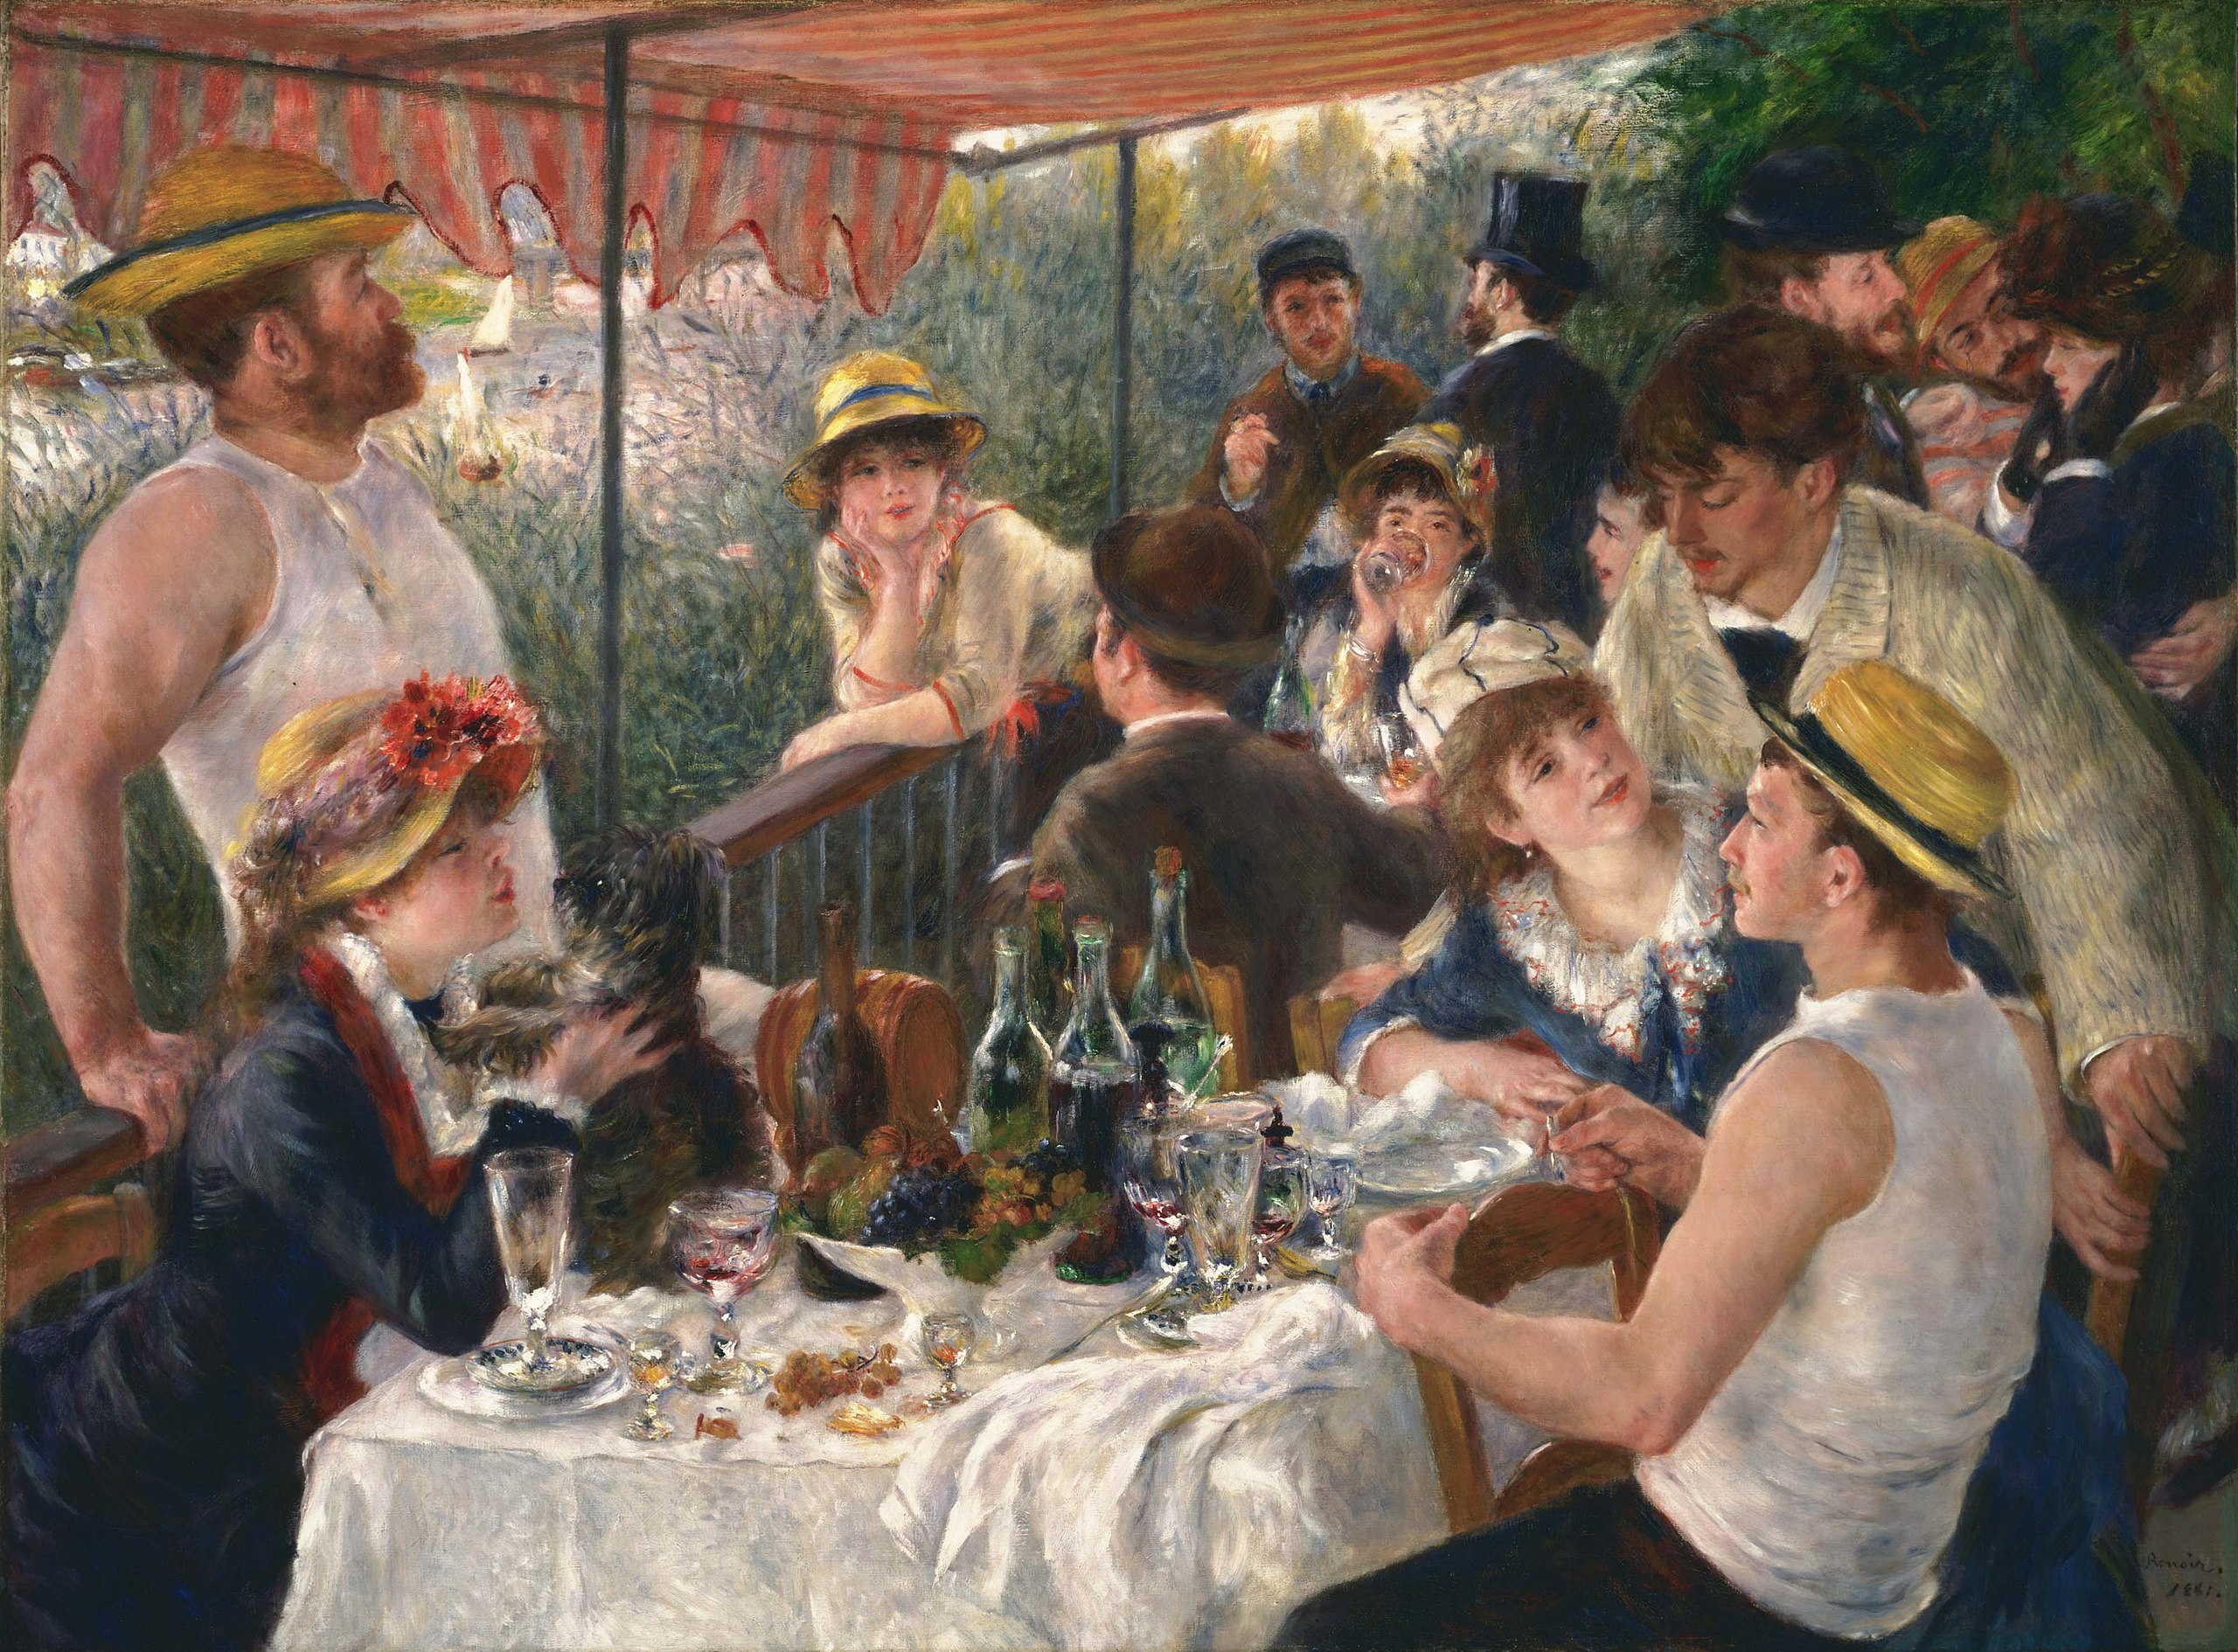 2560px-Pierre-Auguste_Renoir_-_Luncheon_of_the_Boating_Party_-_Google_Art_Project.jpg